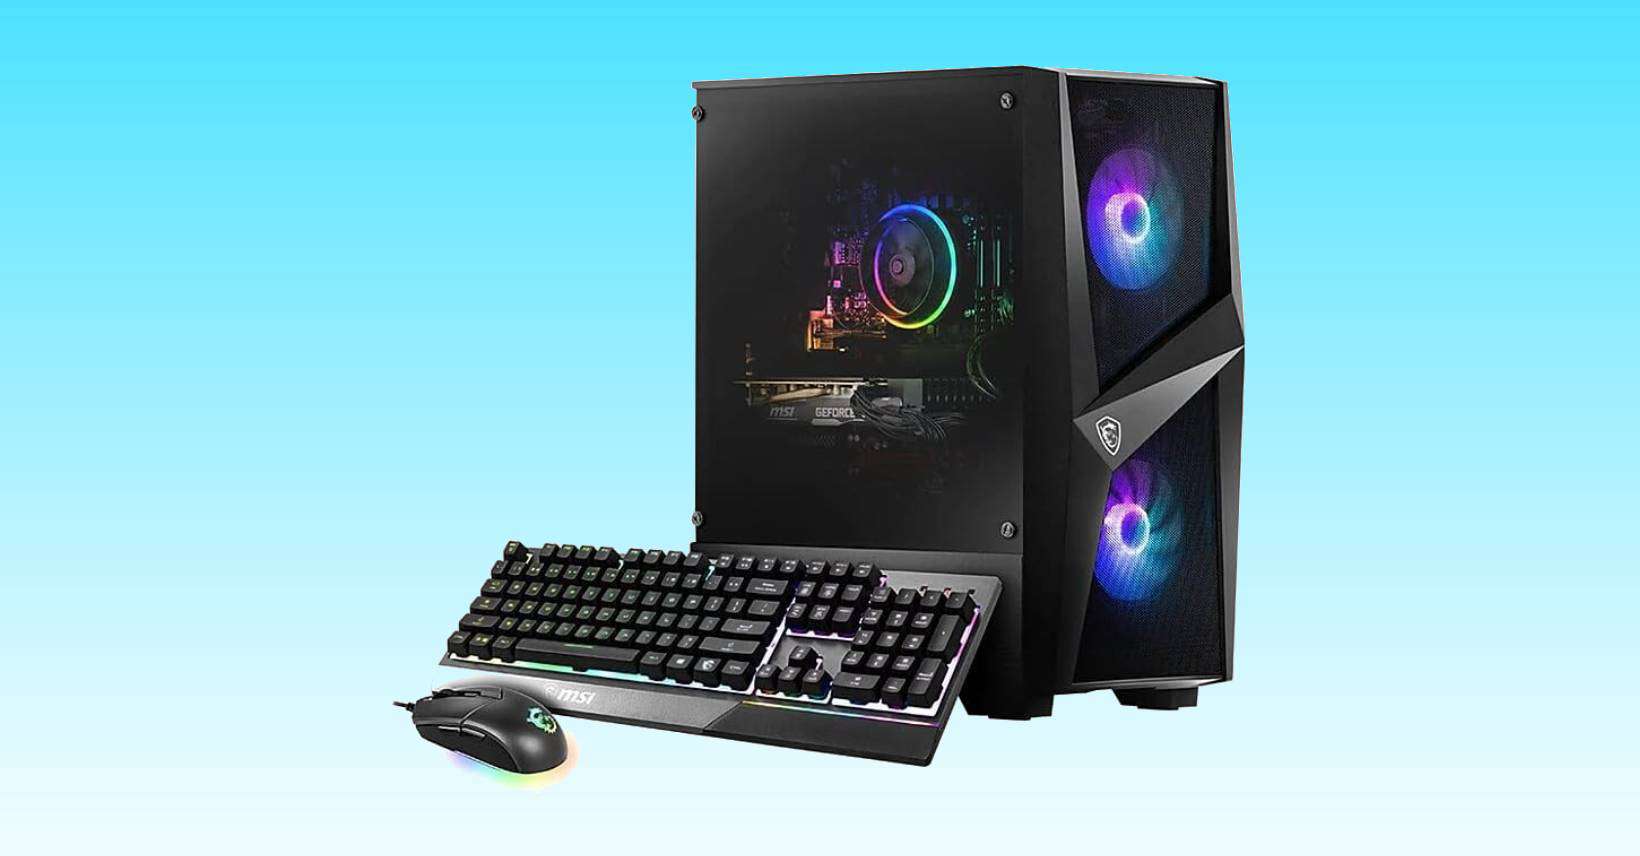 Buy this gaming PC with a GeForce RTX 3060 for $1,109 and have it